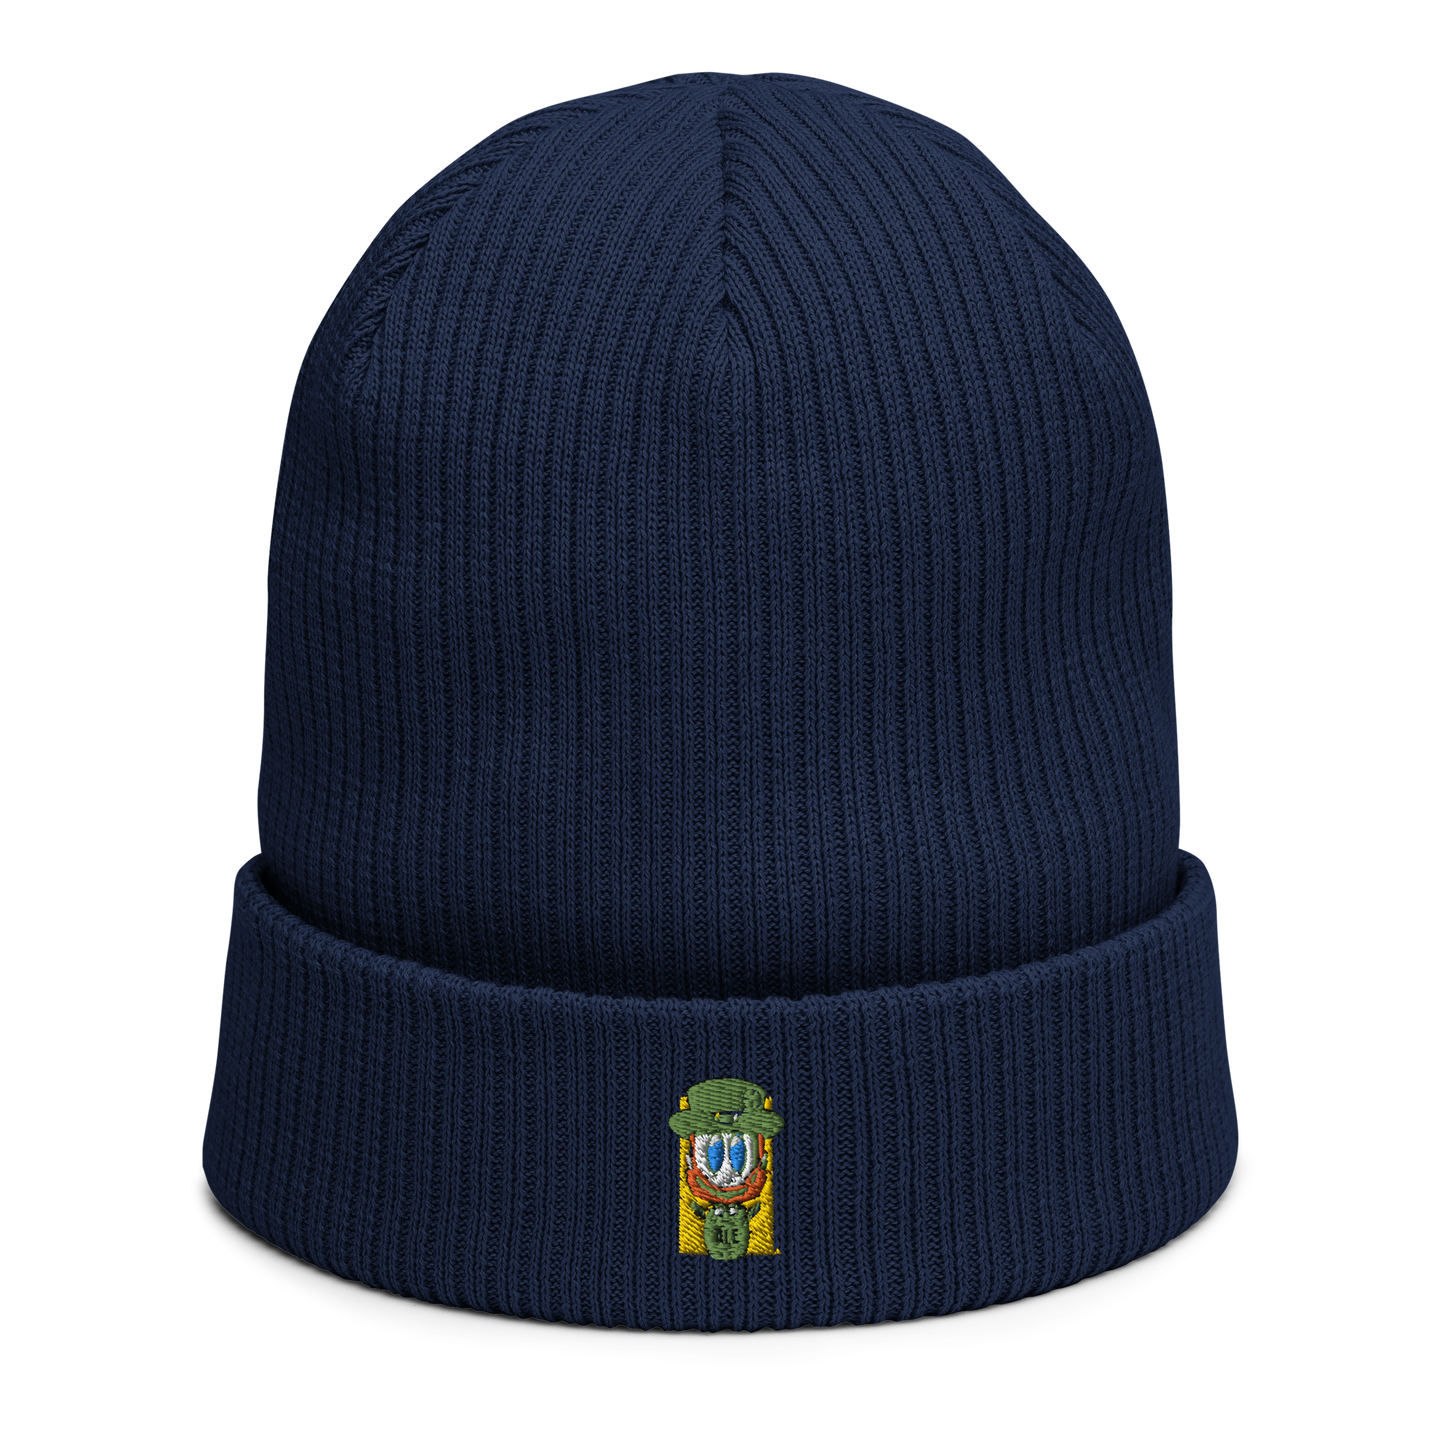 feat. SK - Organic ribbed beanie